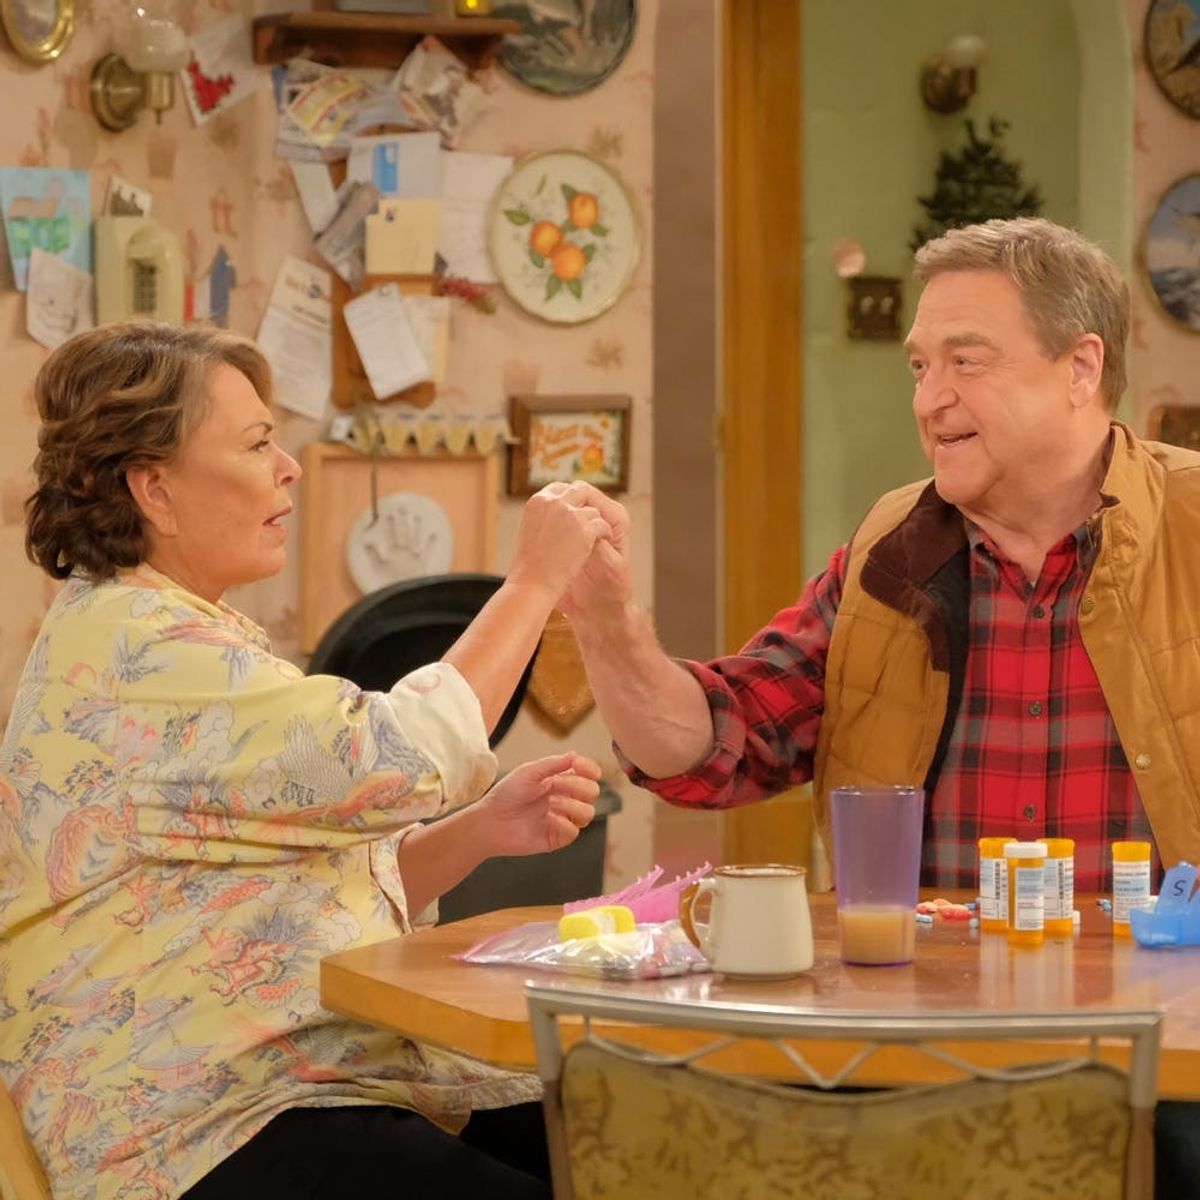 Here’s How the ‘Roseanne’ Reboot Explained Away Dan’s Death in the Original Series